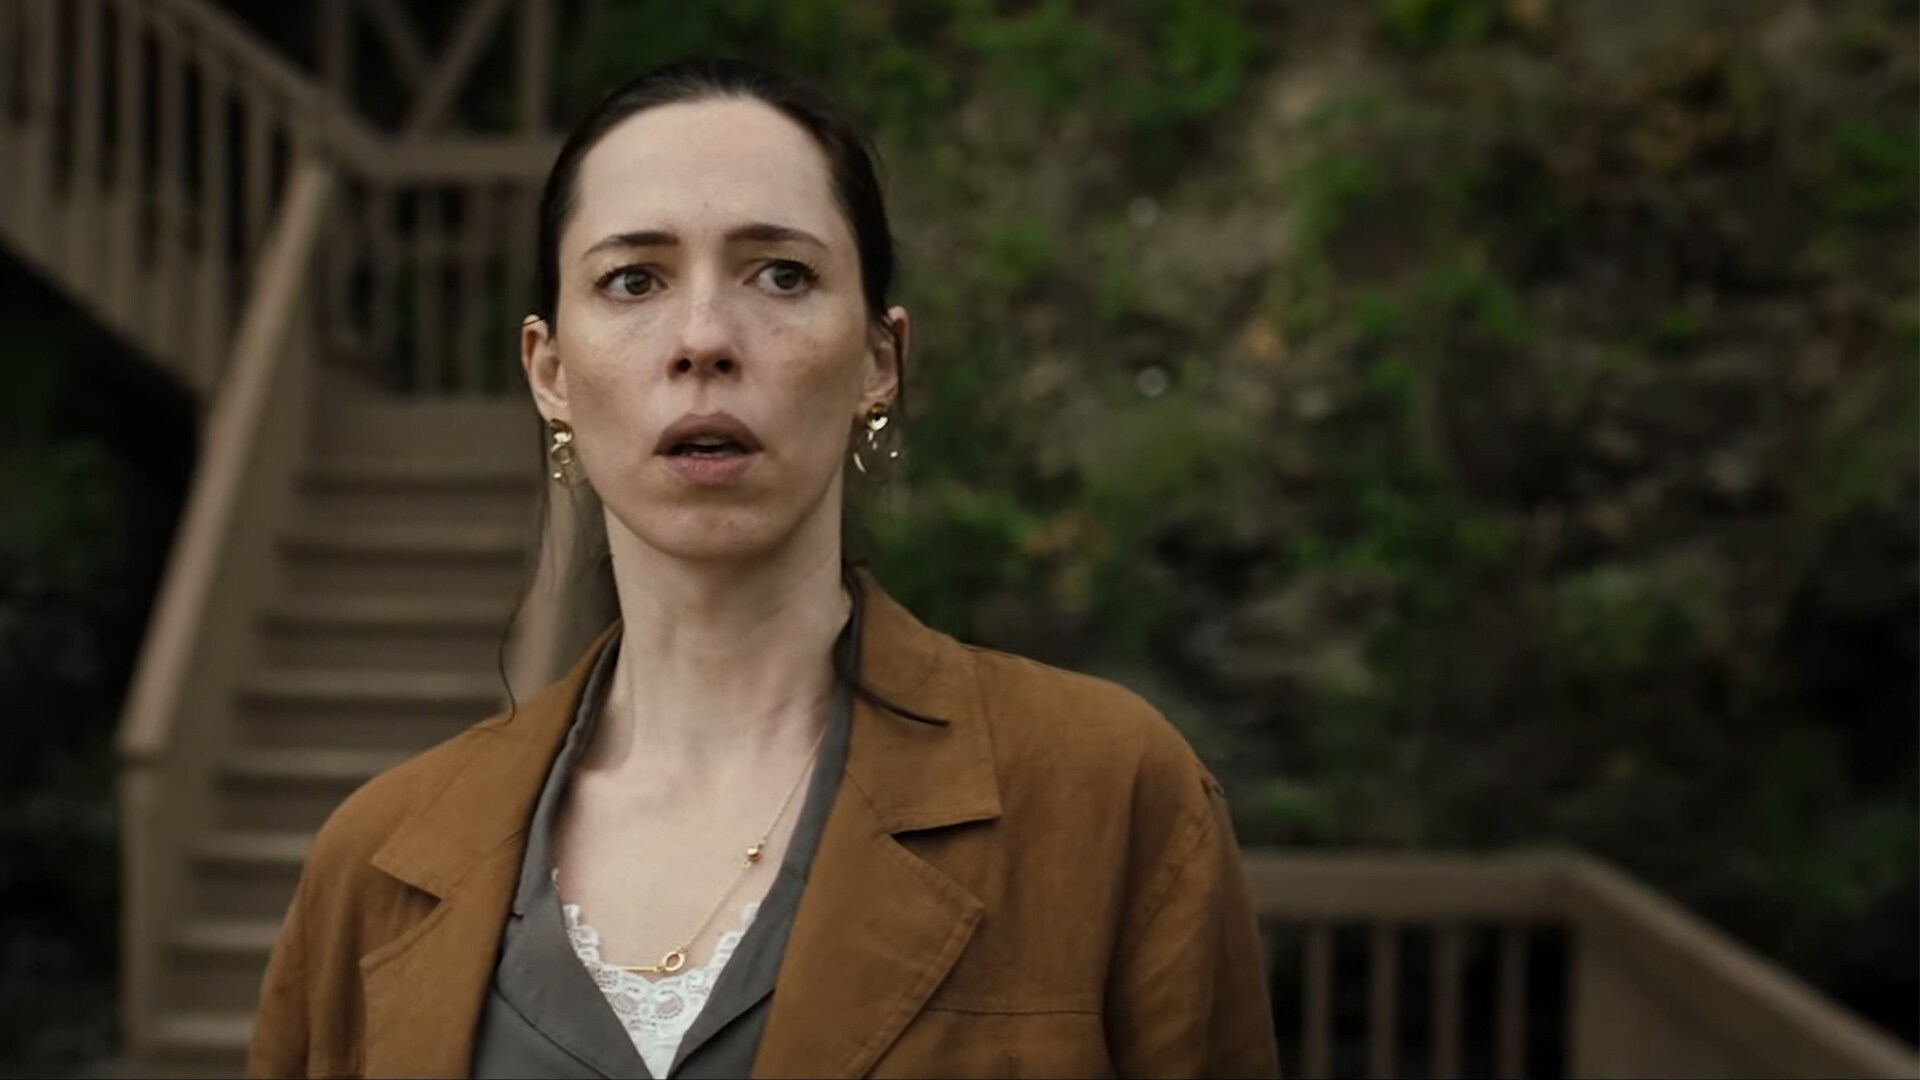 Actor Rebecca Hall with a scared expression standing in front of an outdoor staircase in the movie The Night House